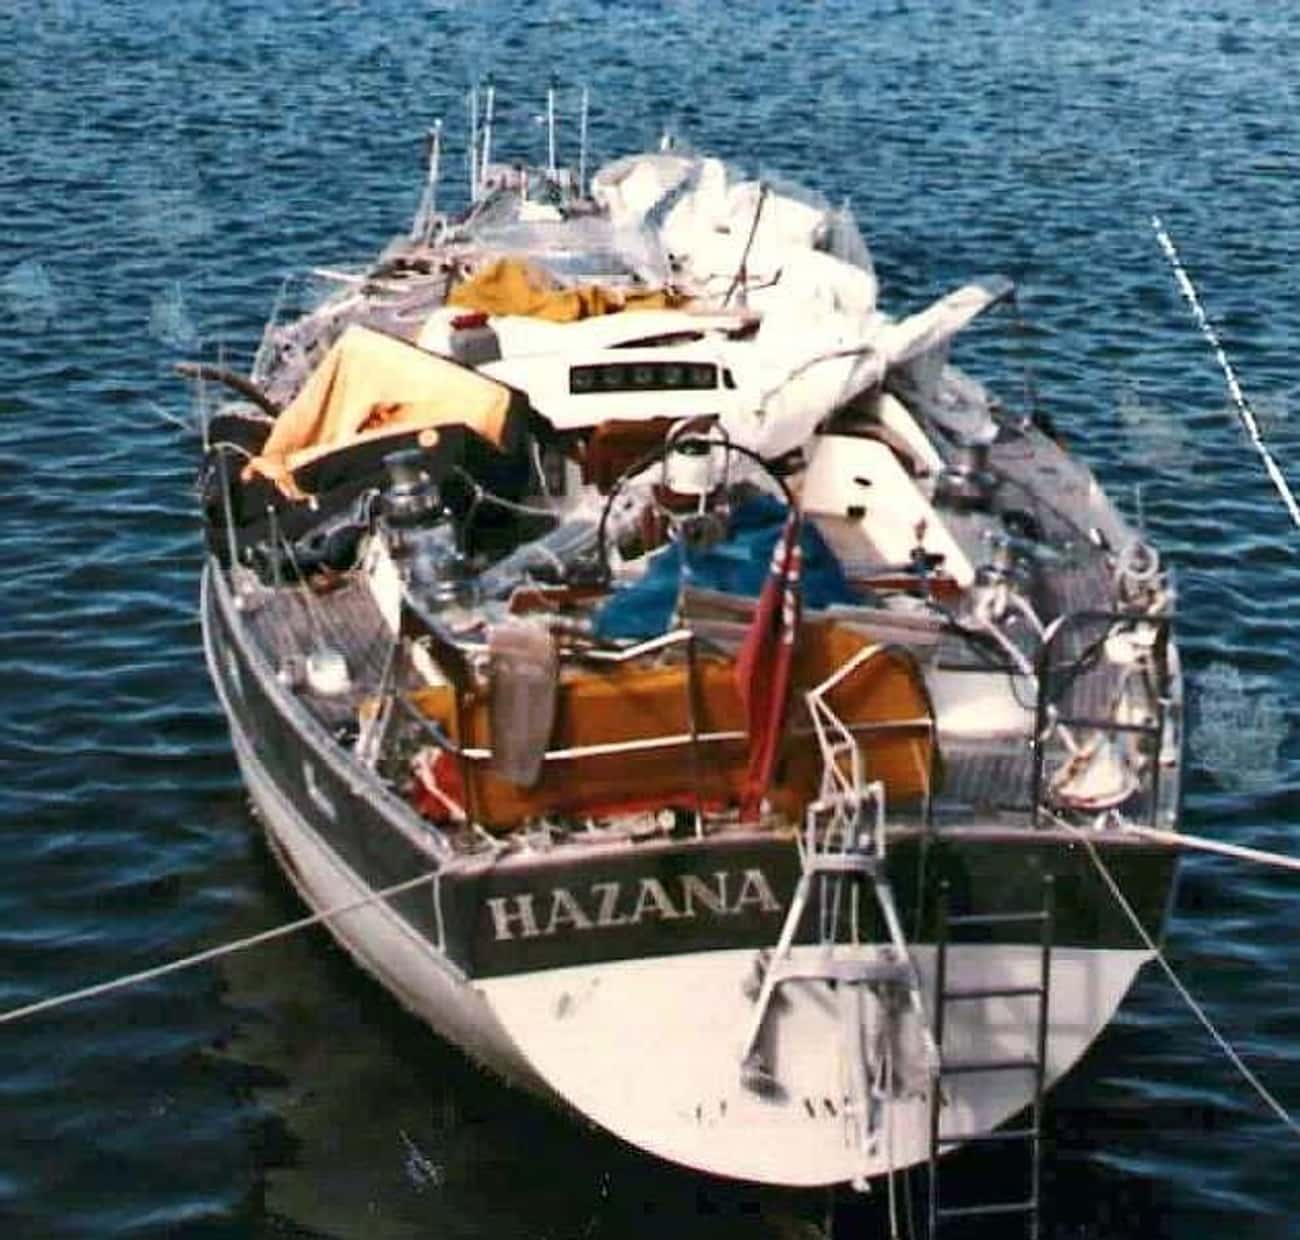 The Storm Destroyed Most Of The Boat&#39;s Equipment